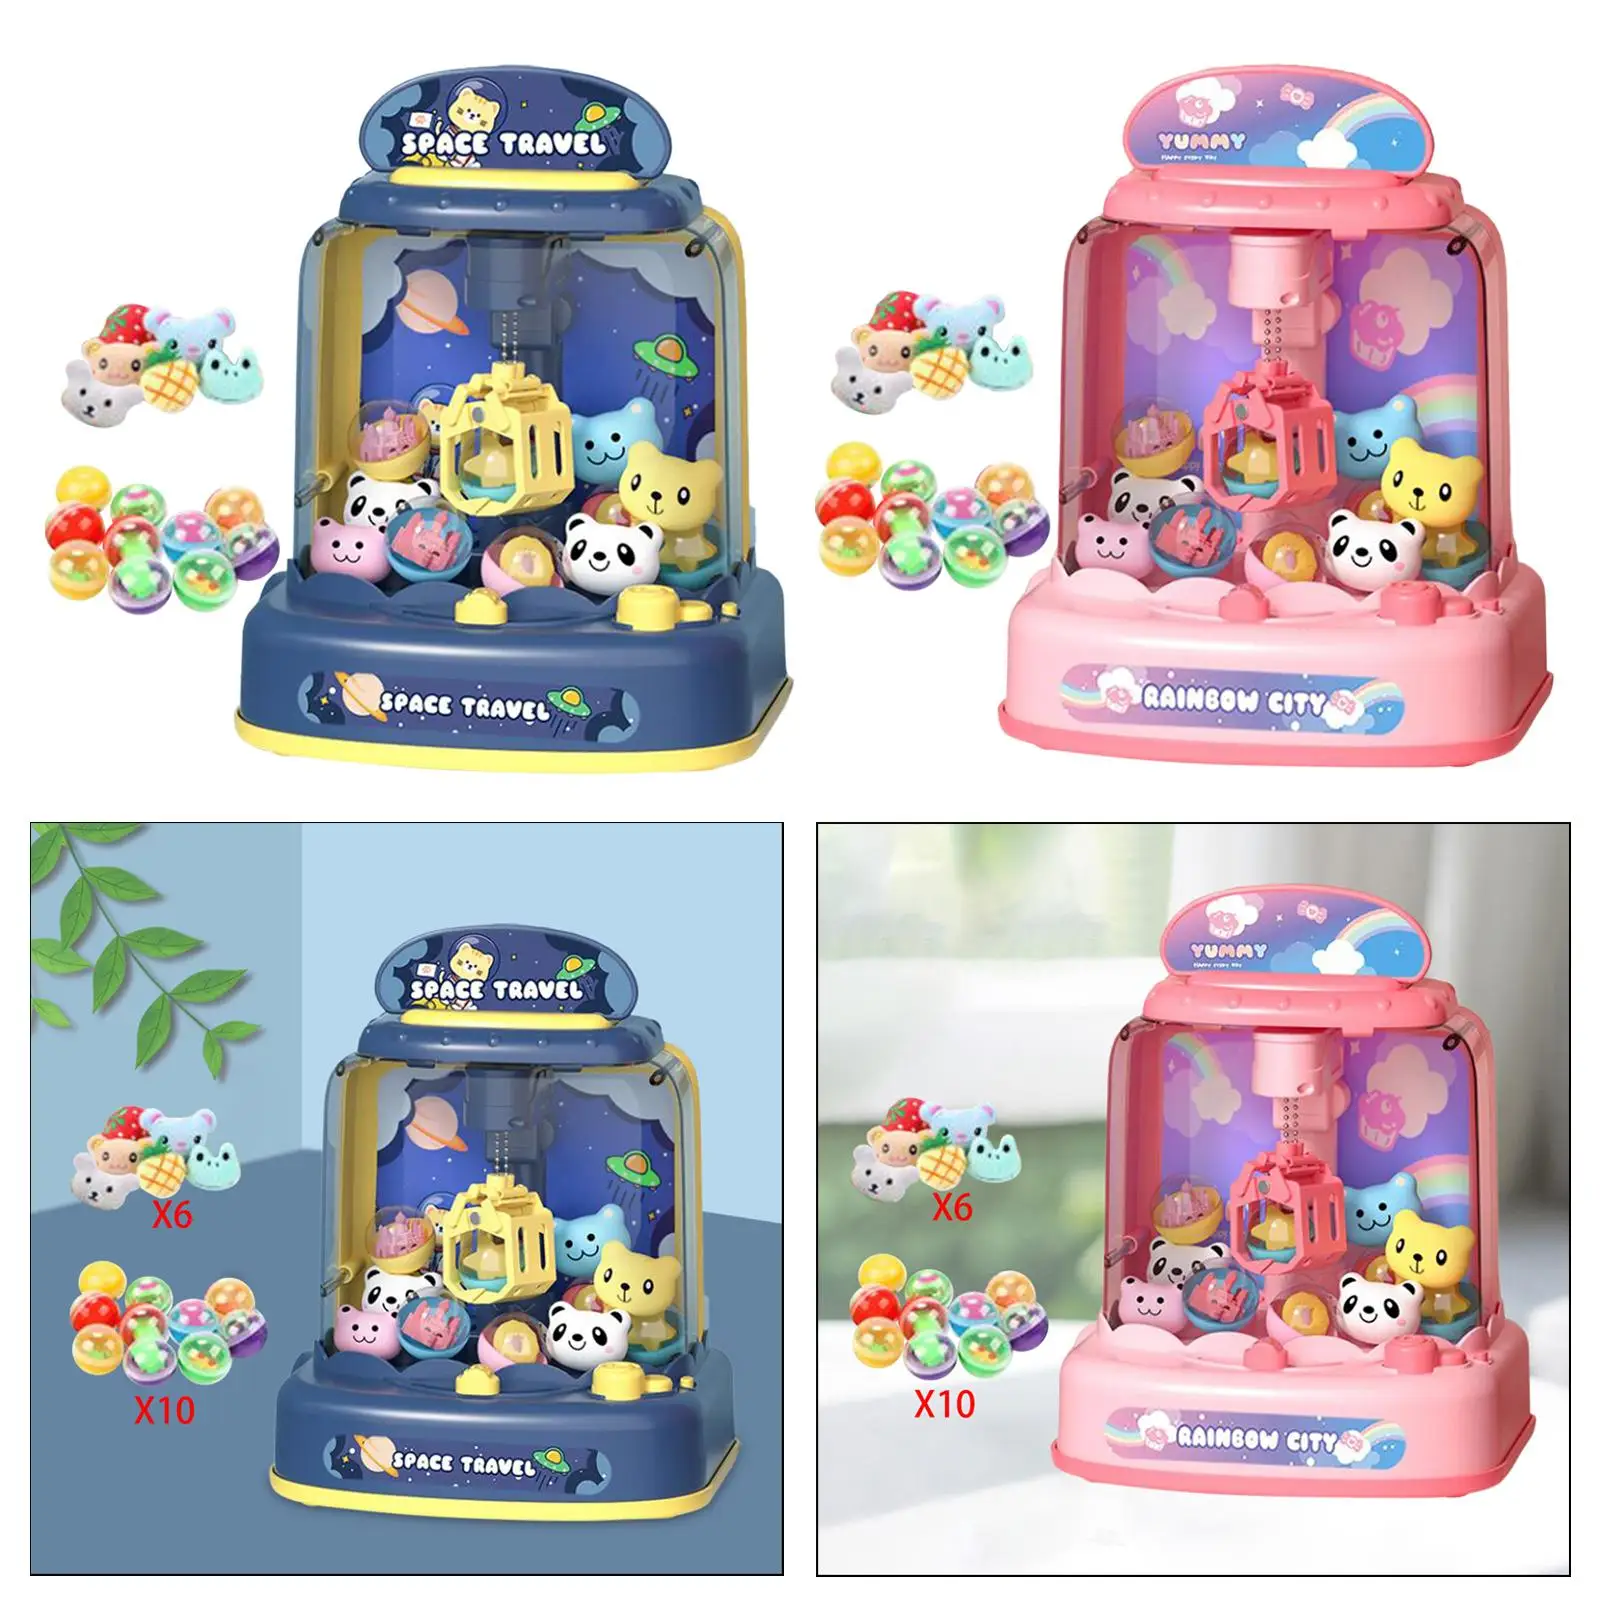 Kids Claw Machine Children Interactive Toys Small Claw Game Mini Vending Machines for Kids 6 7 8 9 Year Old Girls Children Gifts